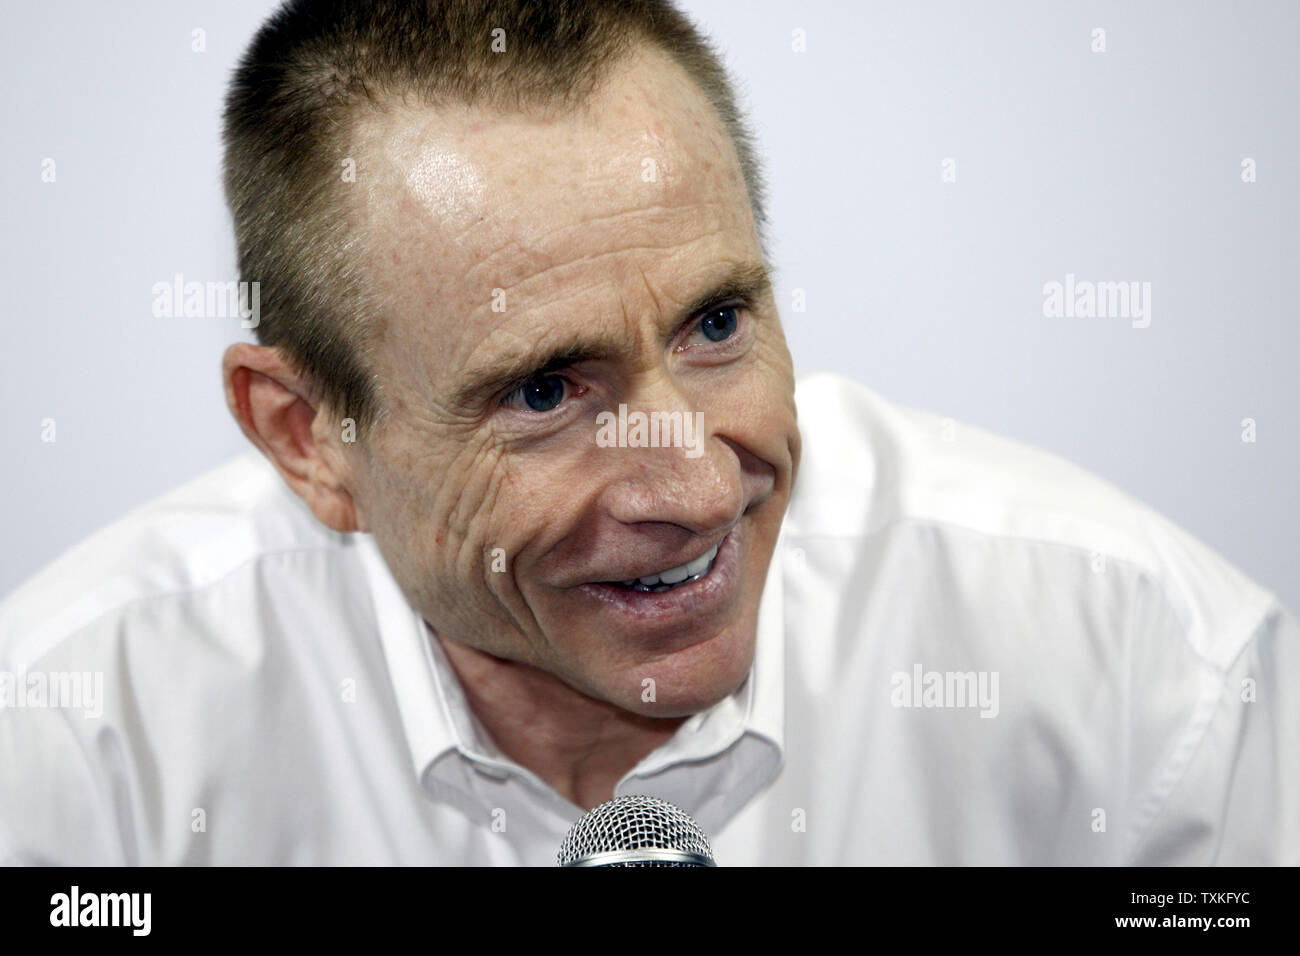 Mark Martin discusses the upcoming NASCAR season during the NASCAR media tour press conference at Hendrick Motorsports in Concord, North Carolina on January 20, 2010.        UPI/Nell Redmond . Stock Photo